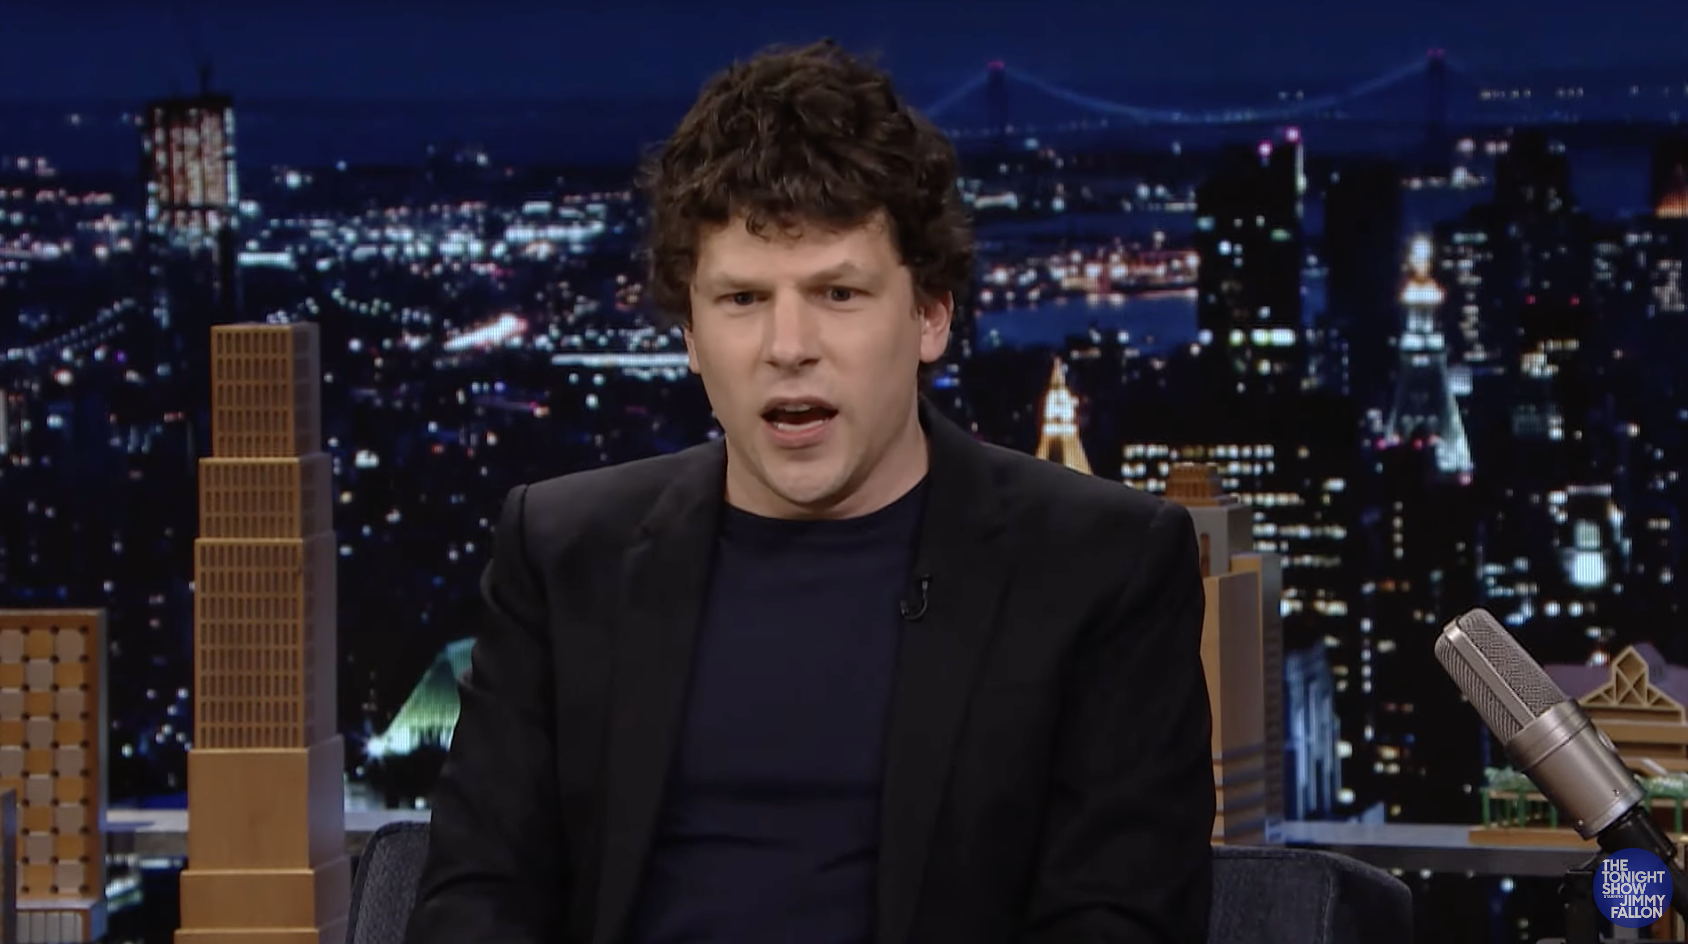 Jesse Eisenberg Met Claire Danes While He Was High And Had No Idea Who She Was